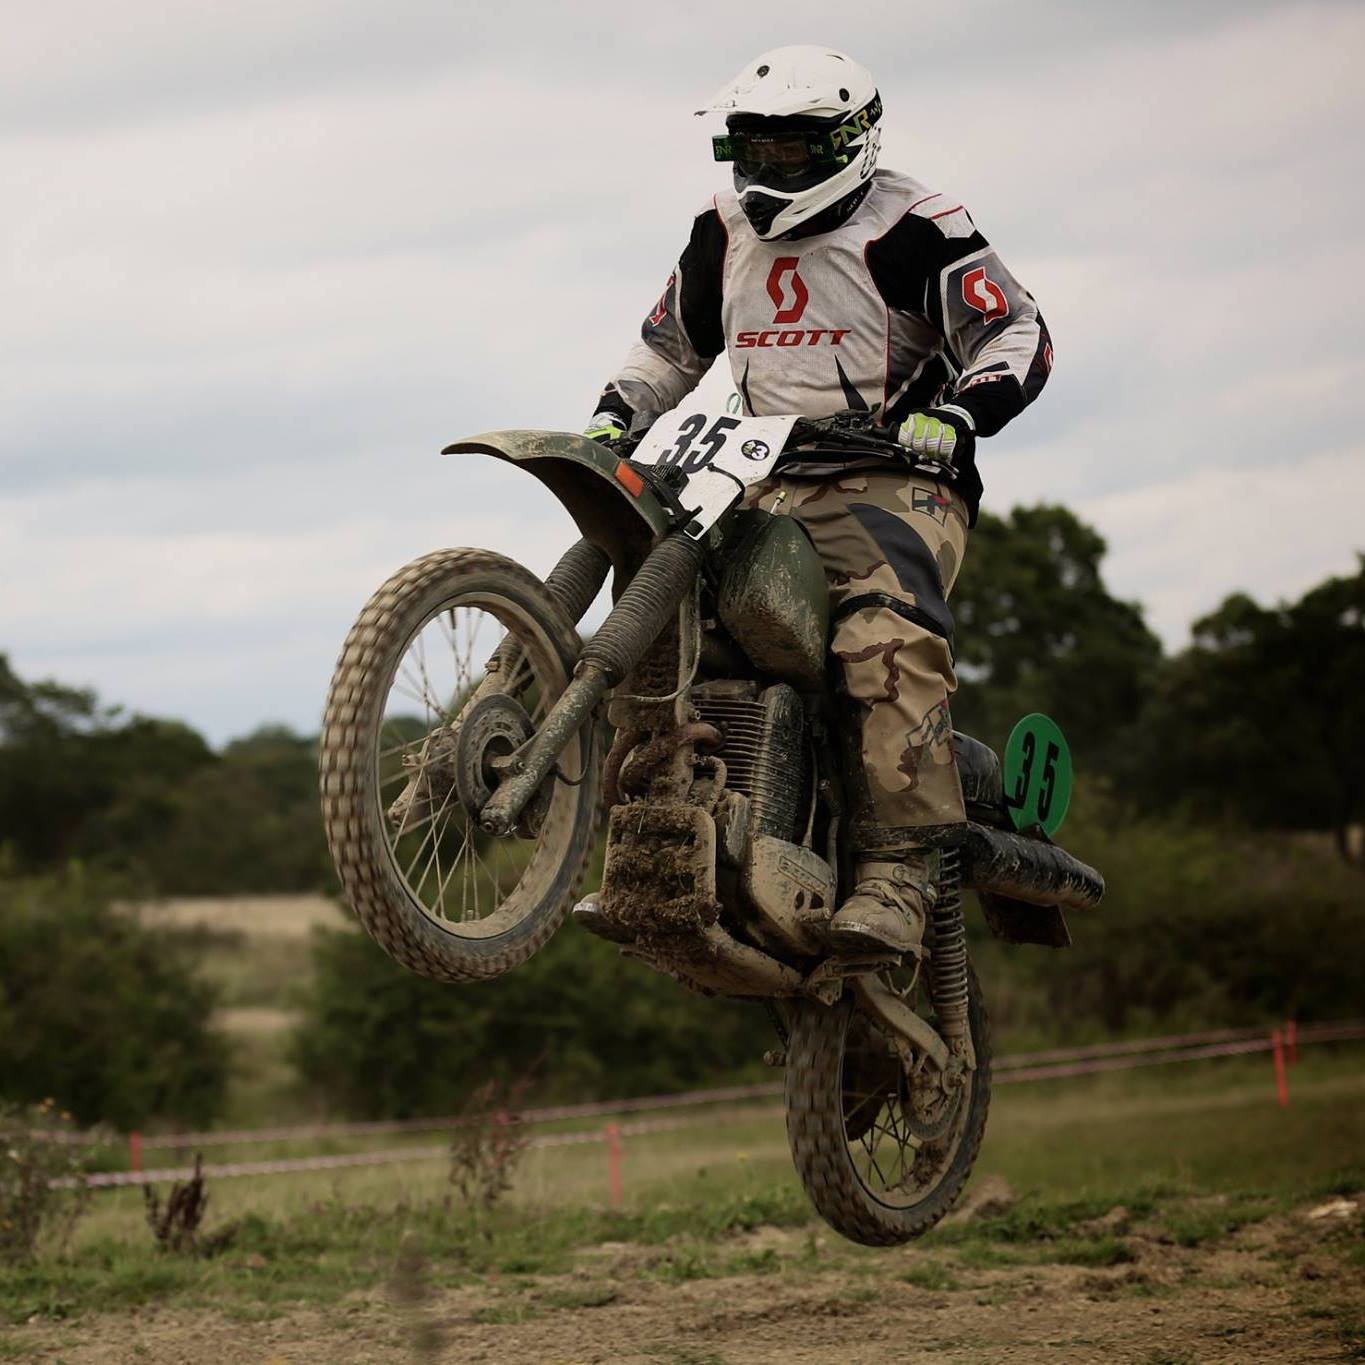 A Harley-Davidson MT350 jumping on a motocross track jump